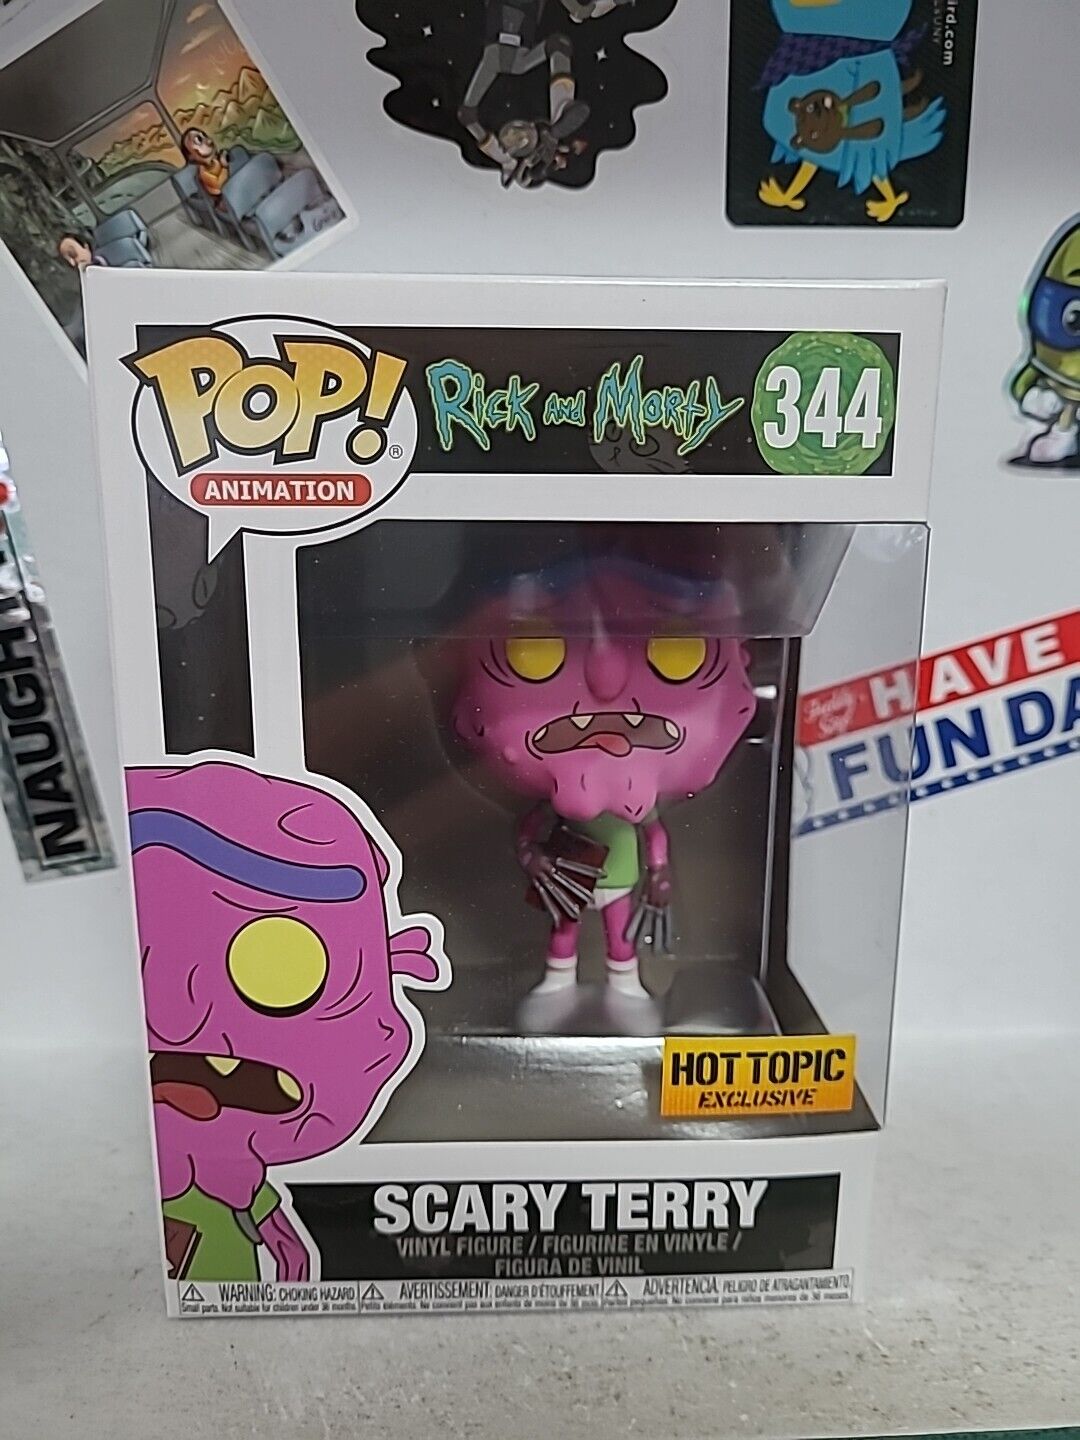 Funko Pop Rick And Morty Scary Terry #344 (Hot Topic Exc) Vinyl Figure